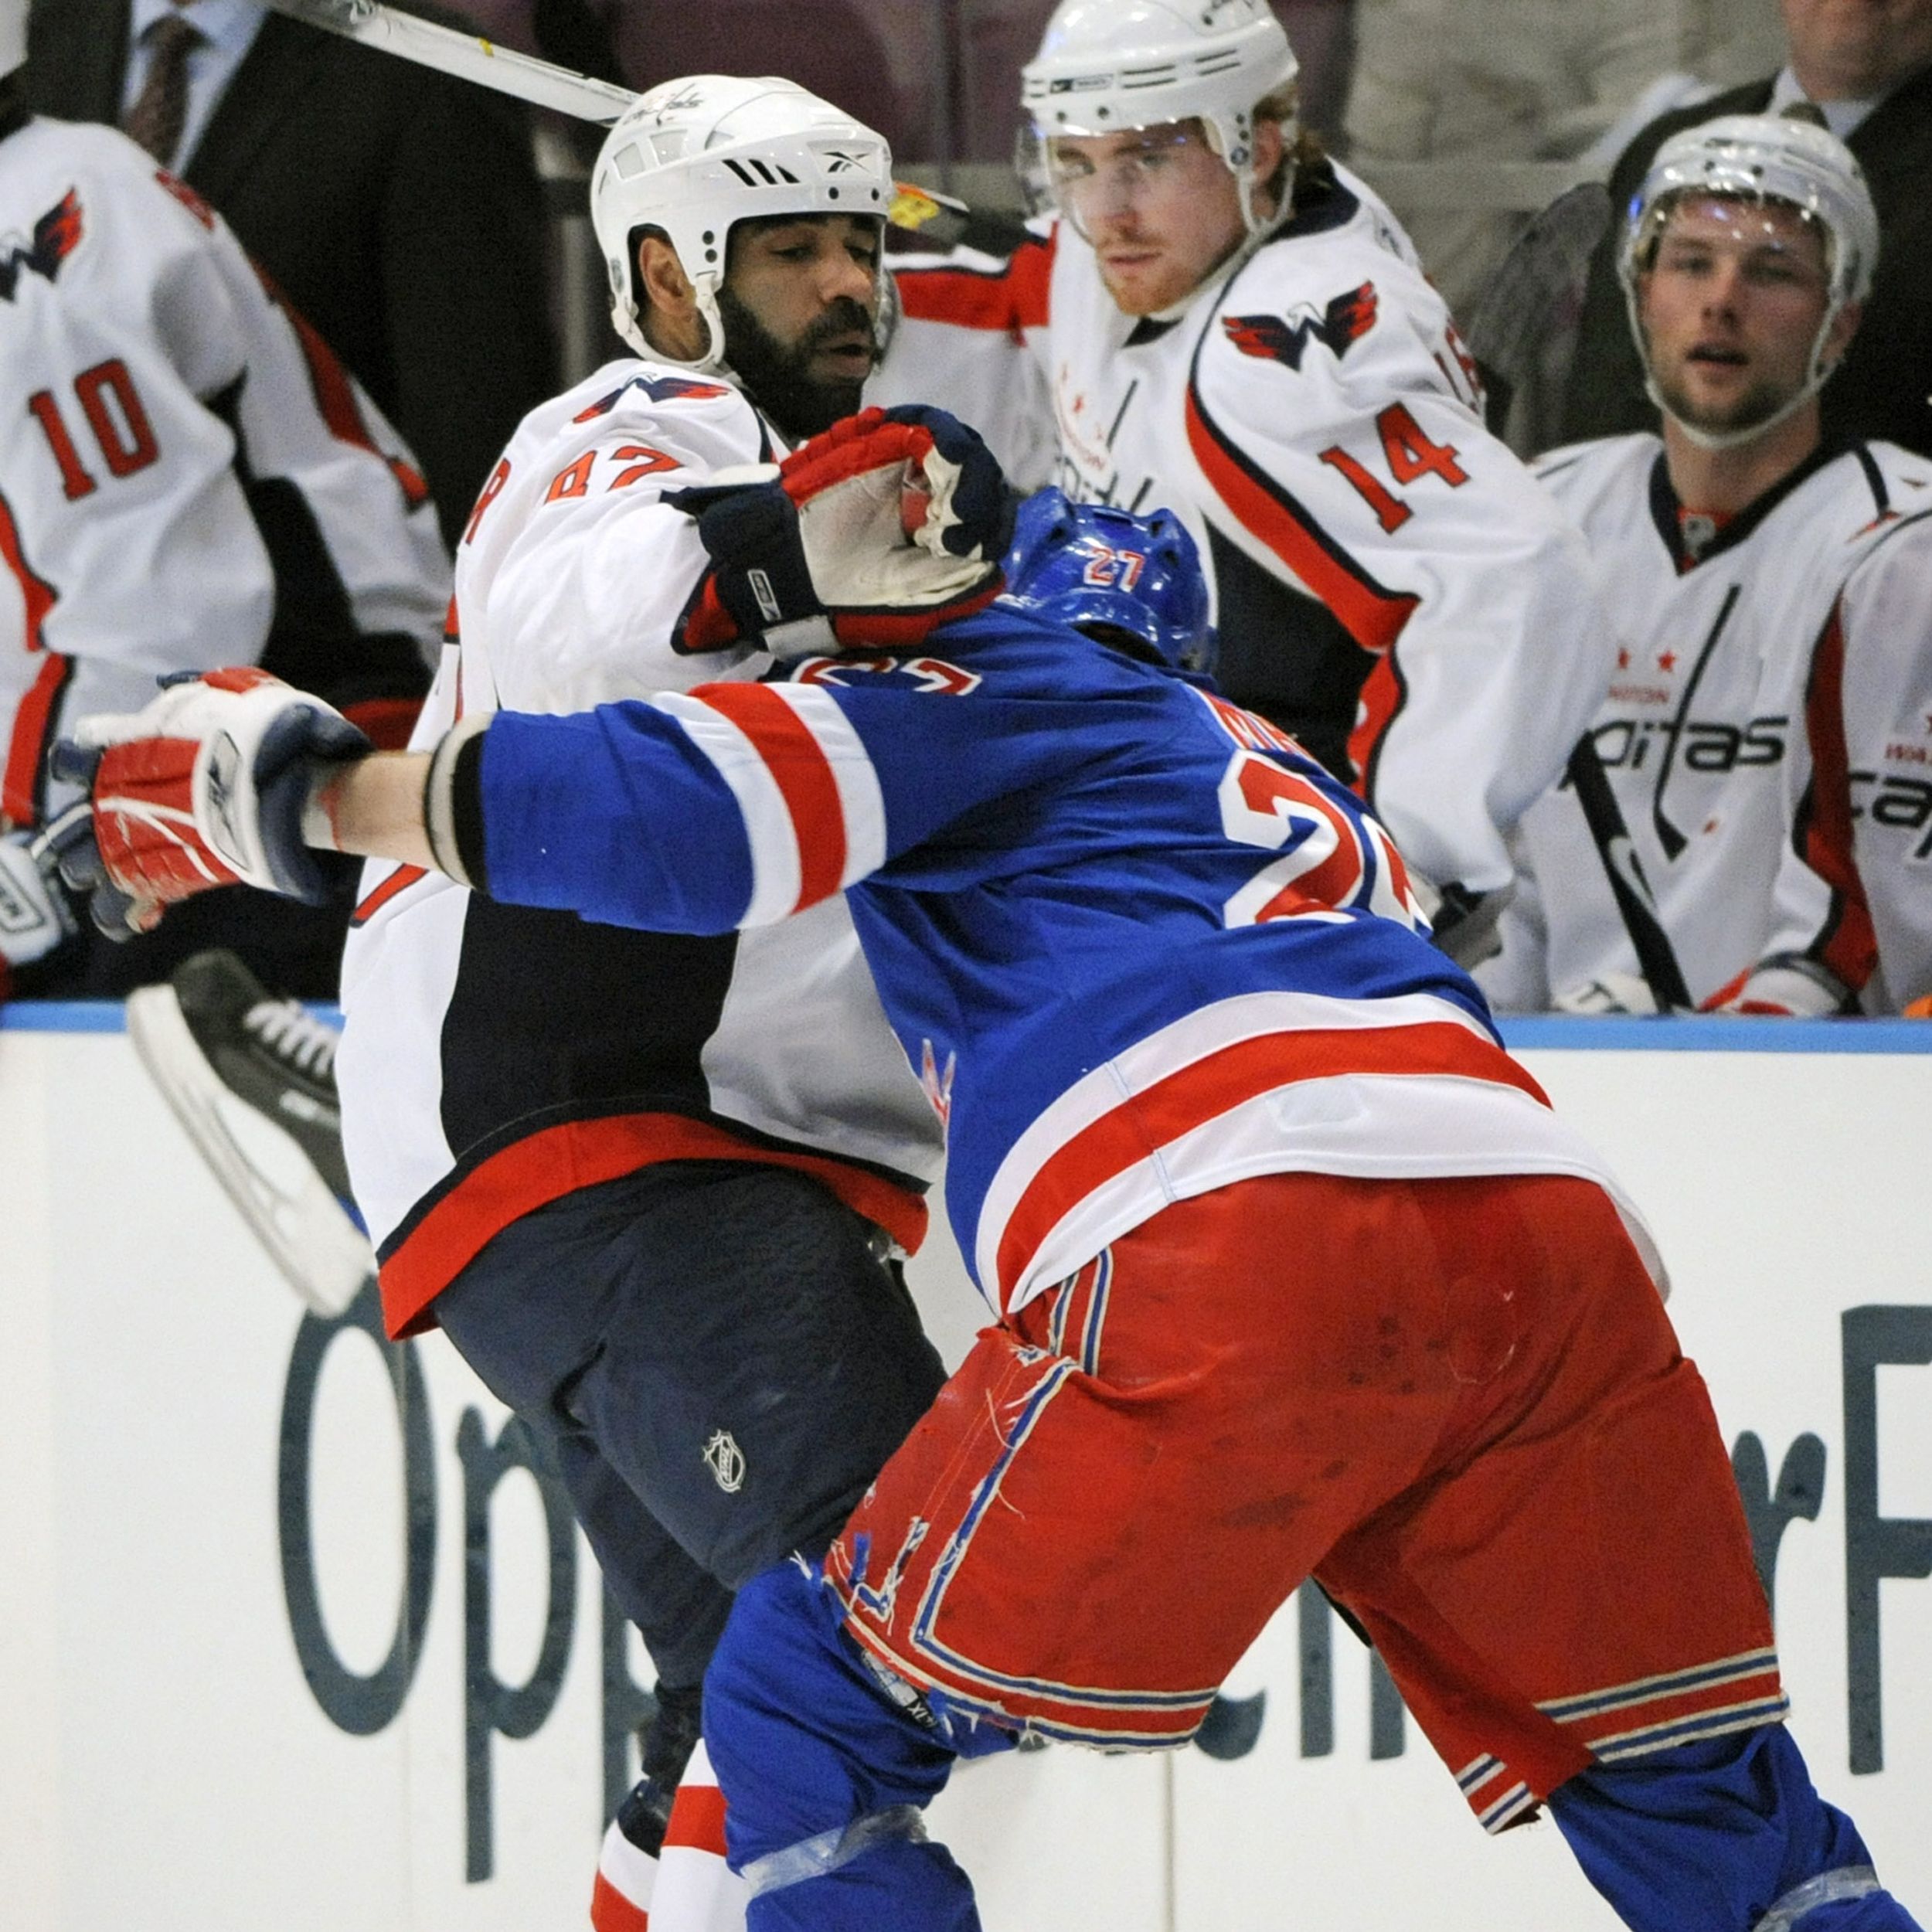 In brief: Capitals' Brashear gets six-game suspension